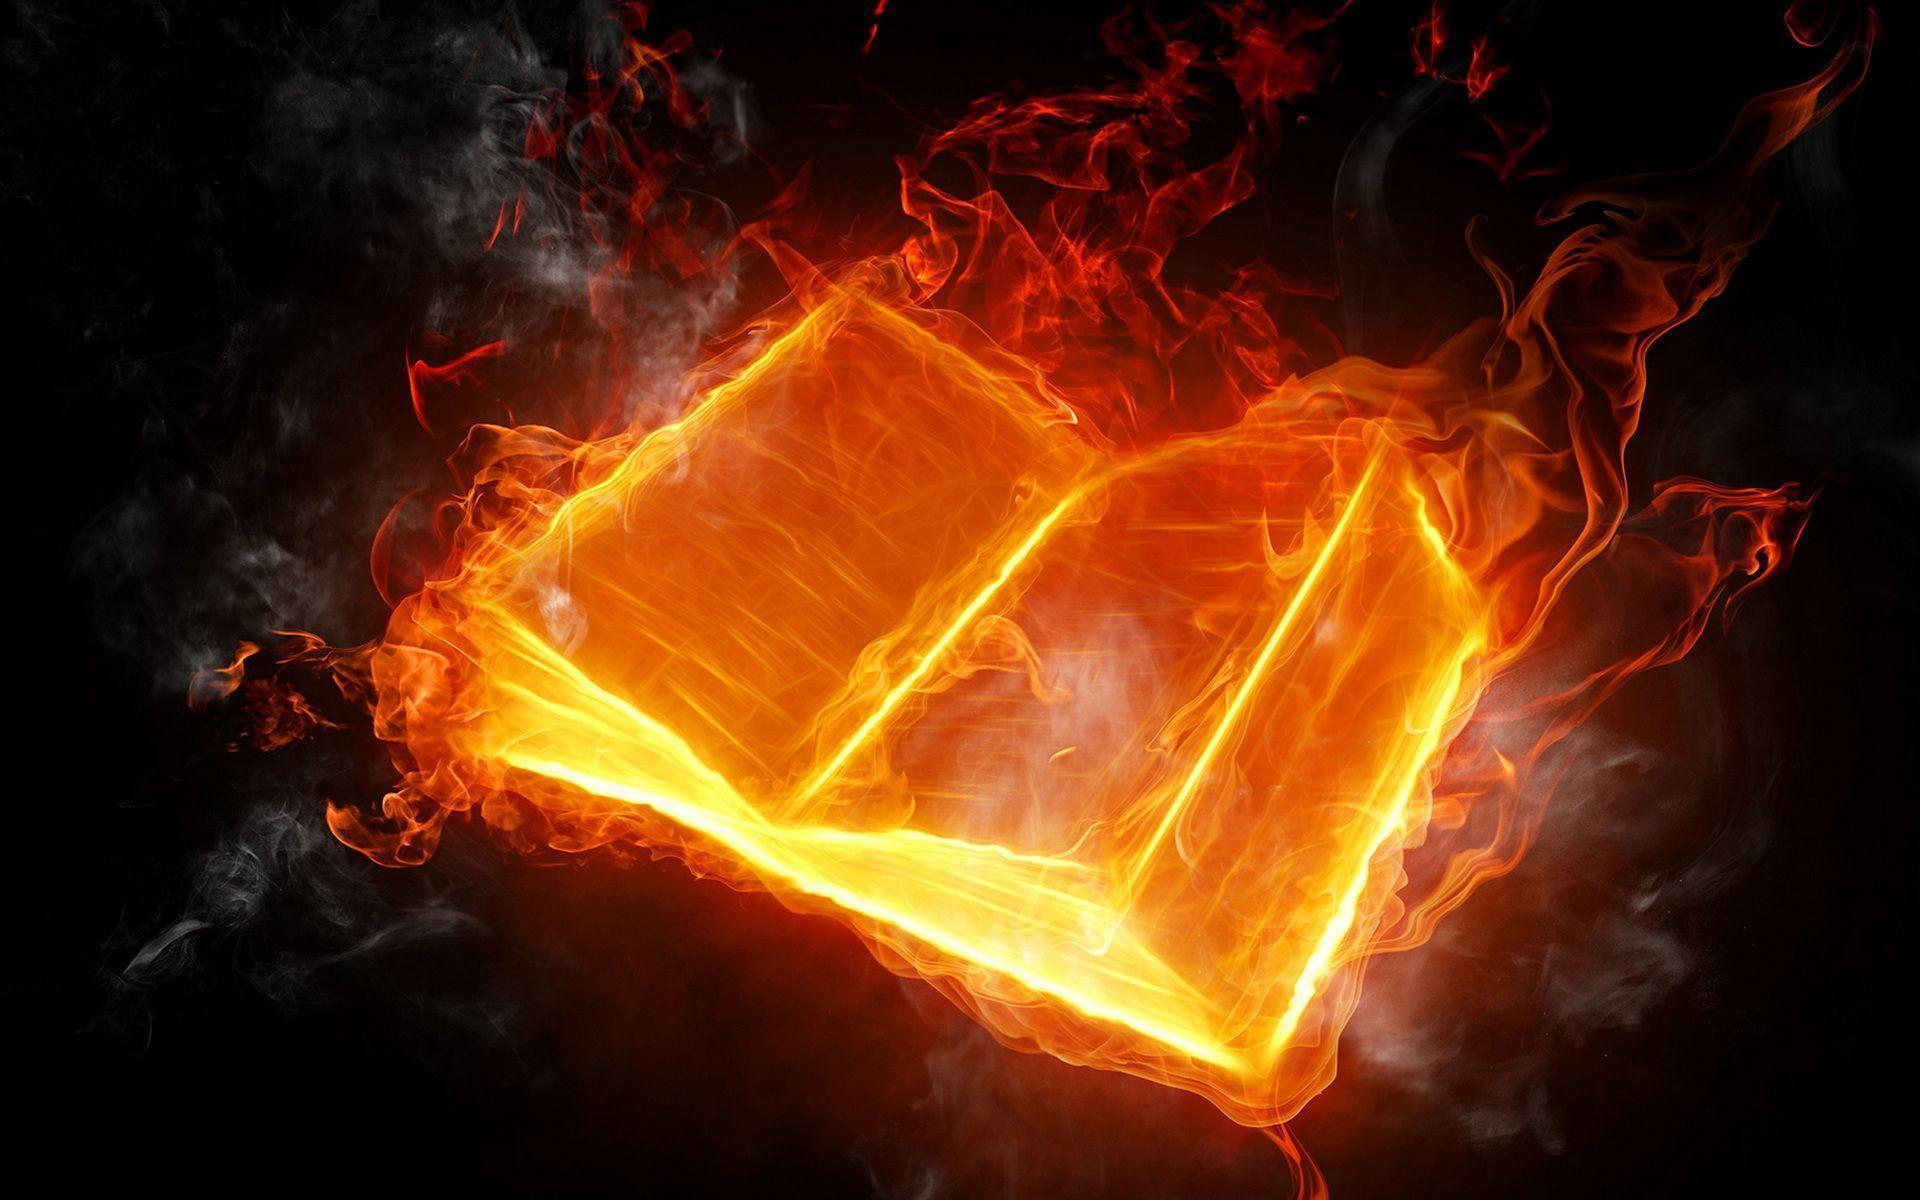 Book in flames. Widescreen and Full HD Wallpaper